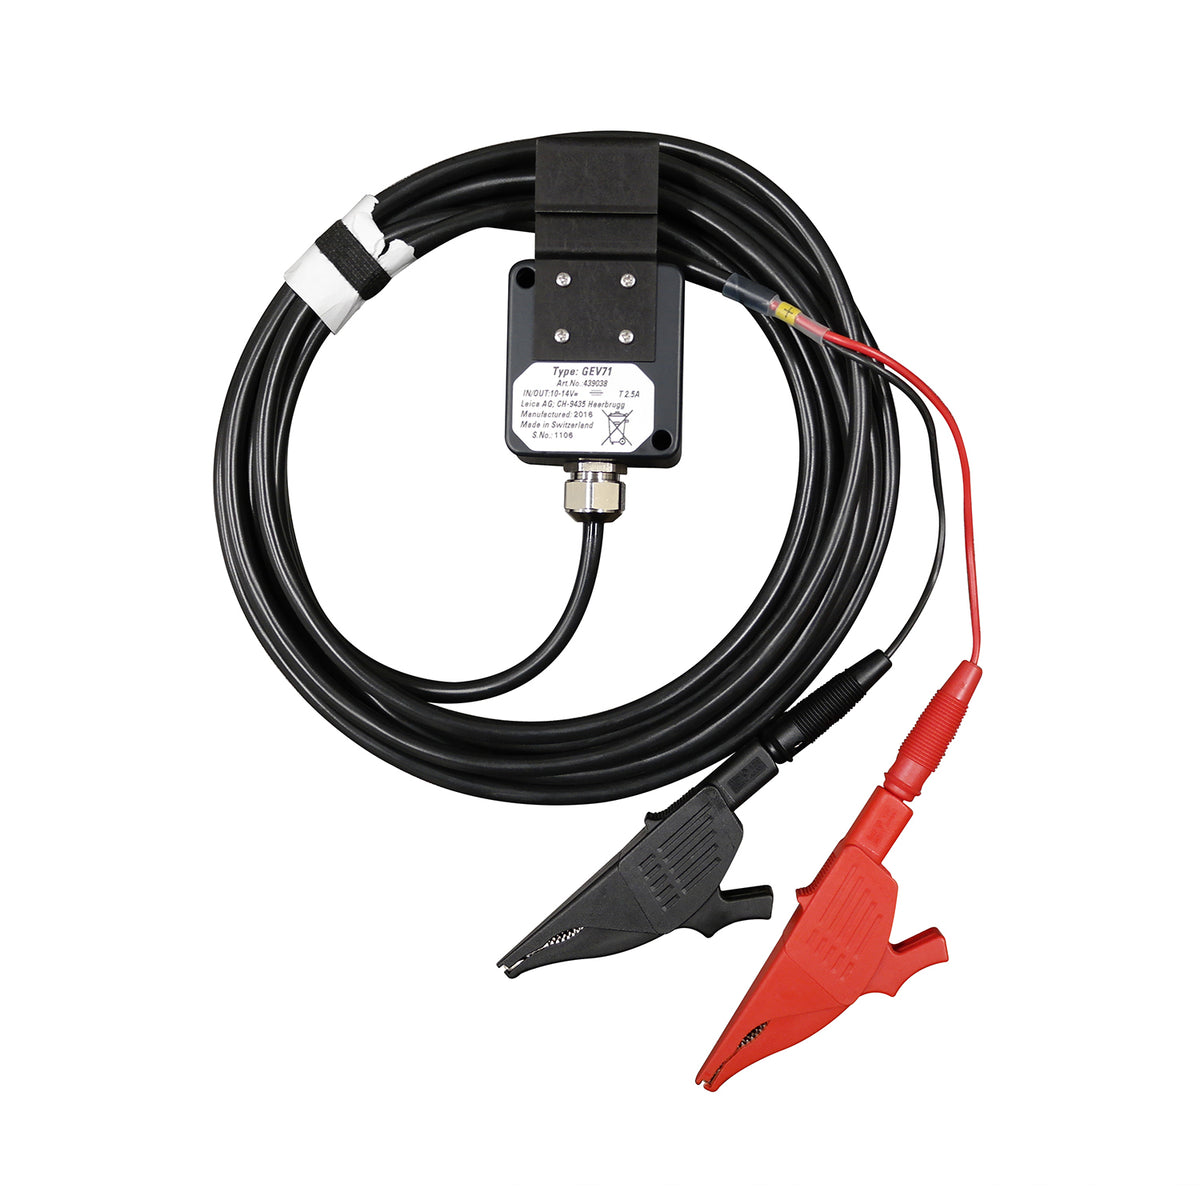 GeoMax GEV71 Car Battery Power Cable -Total Stations- eGPS Solutions Inc.